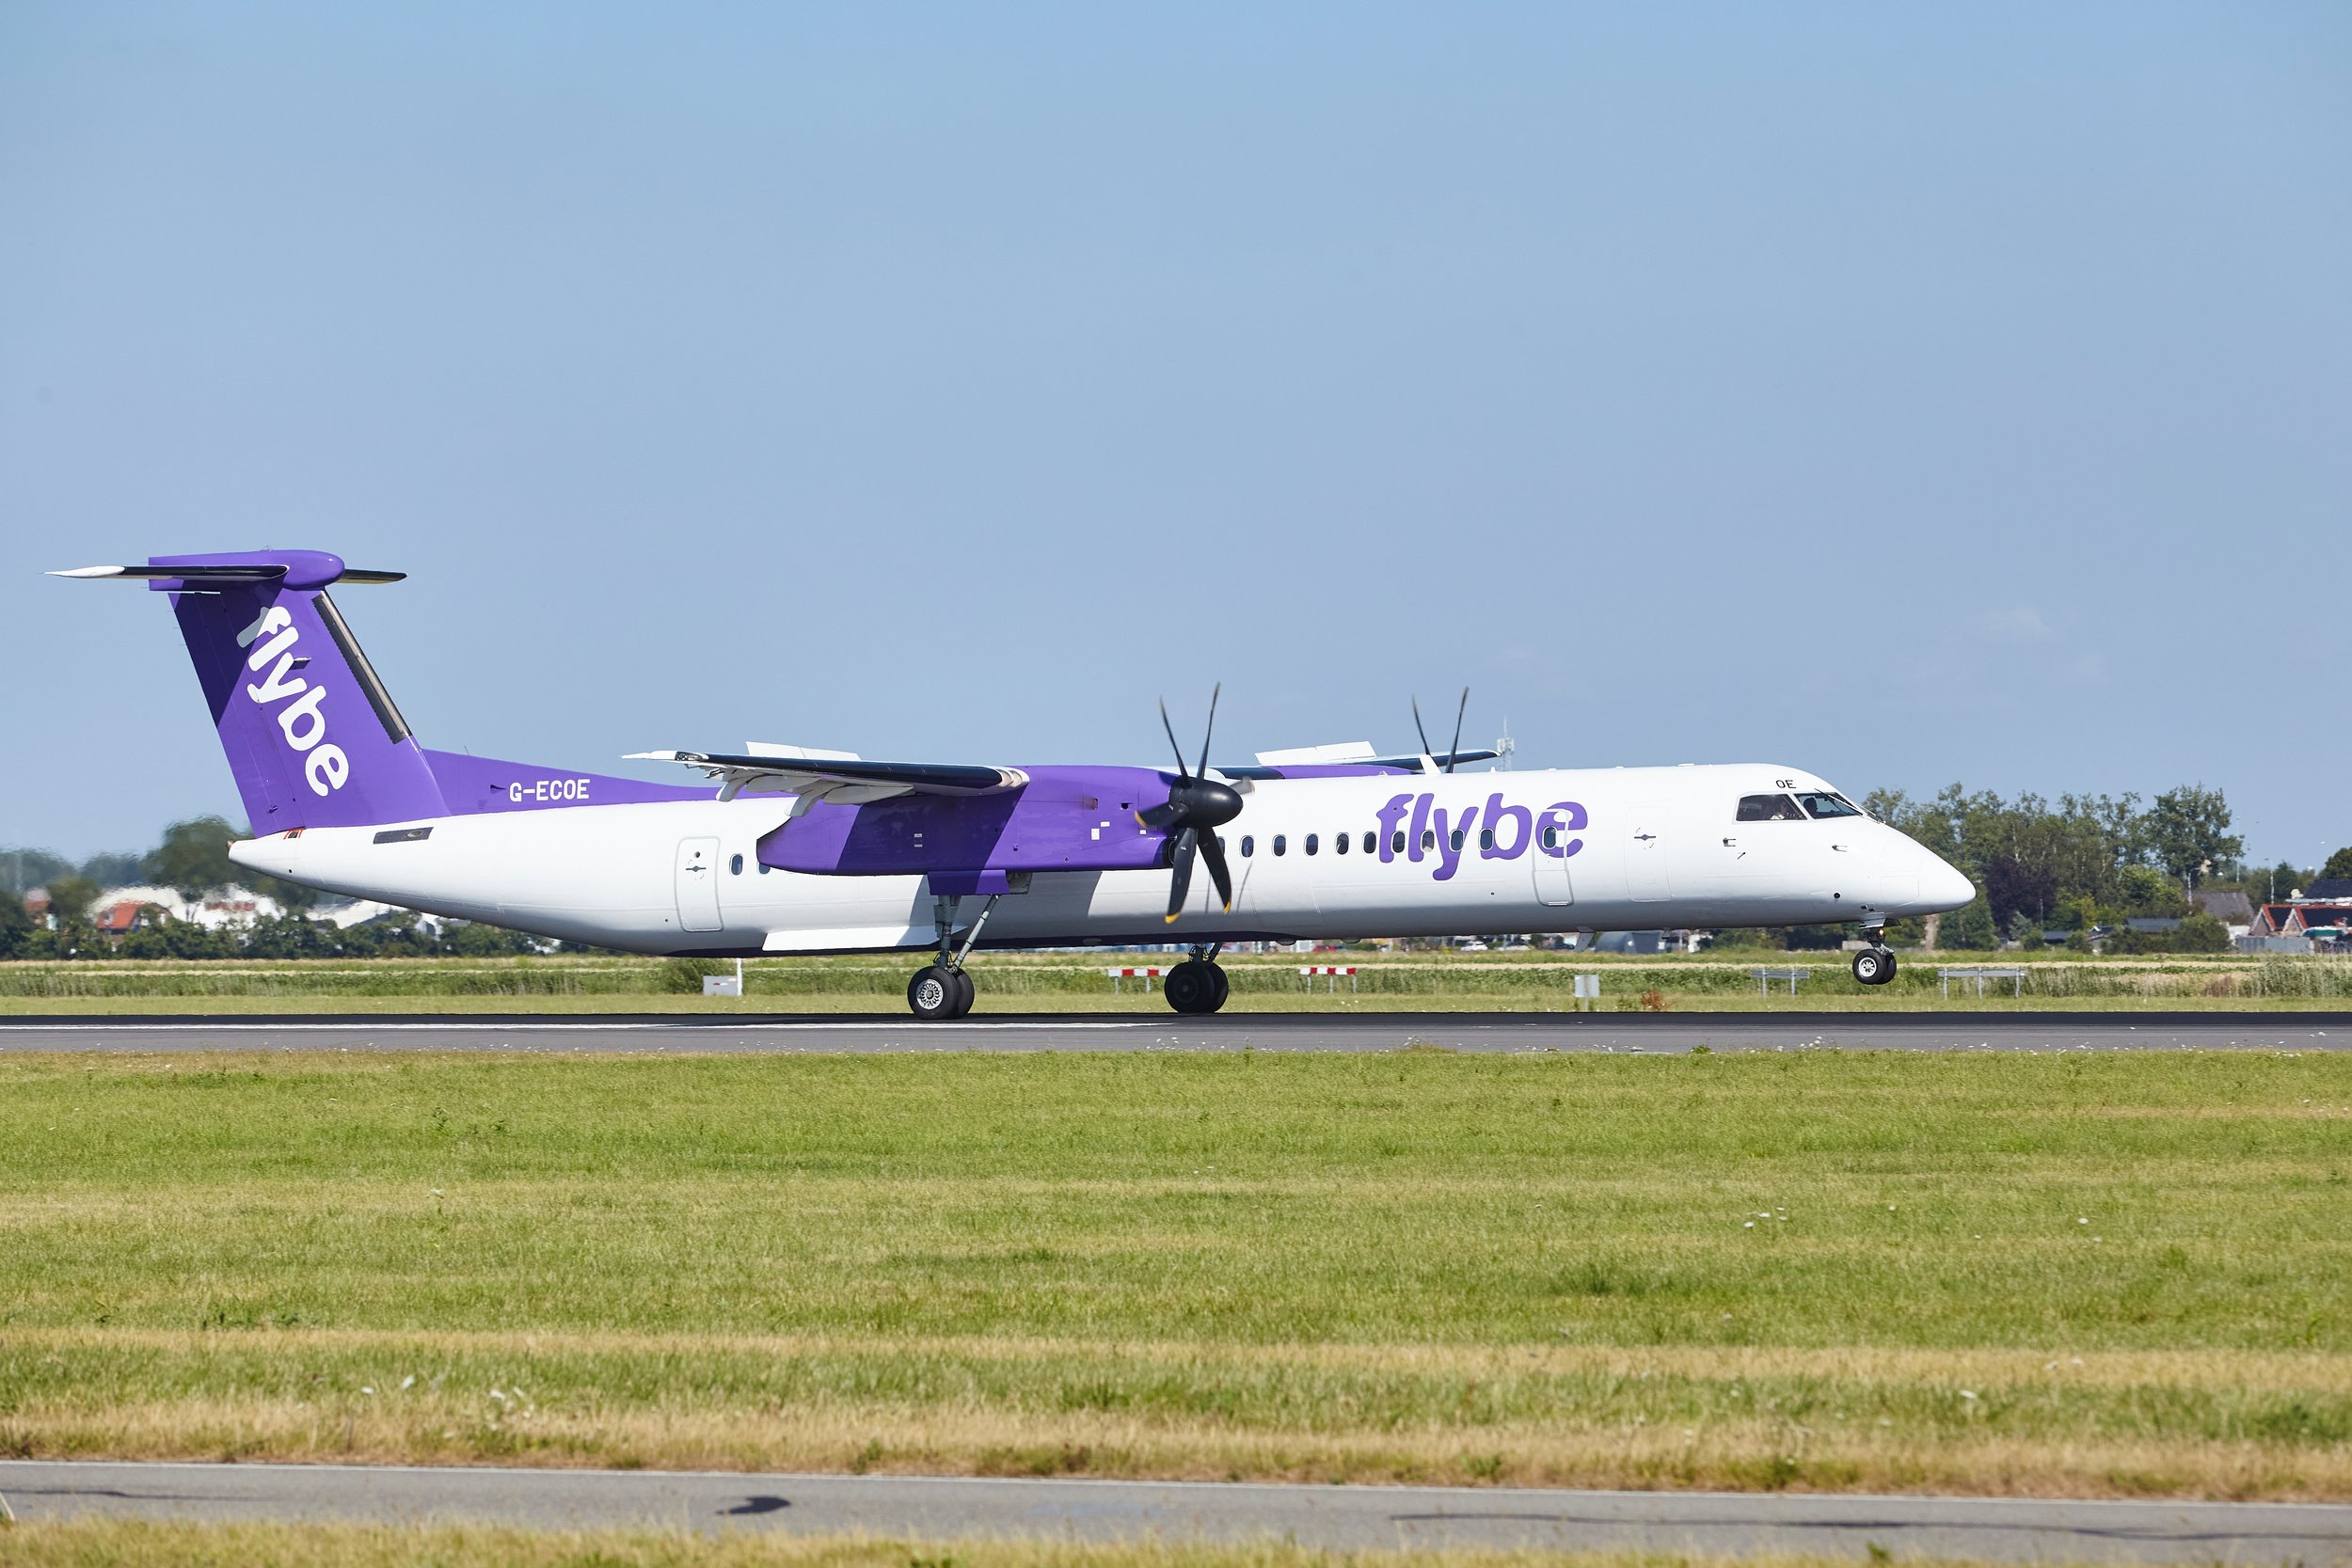 And so the Deicing season starts… with our newest client, Flybe 